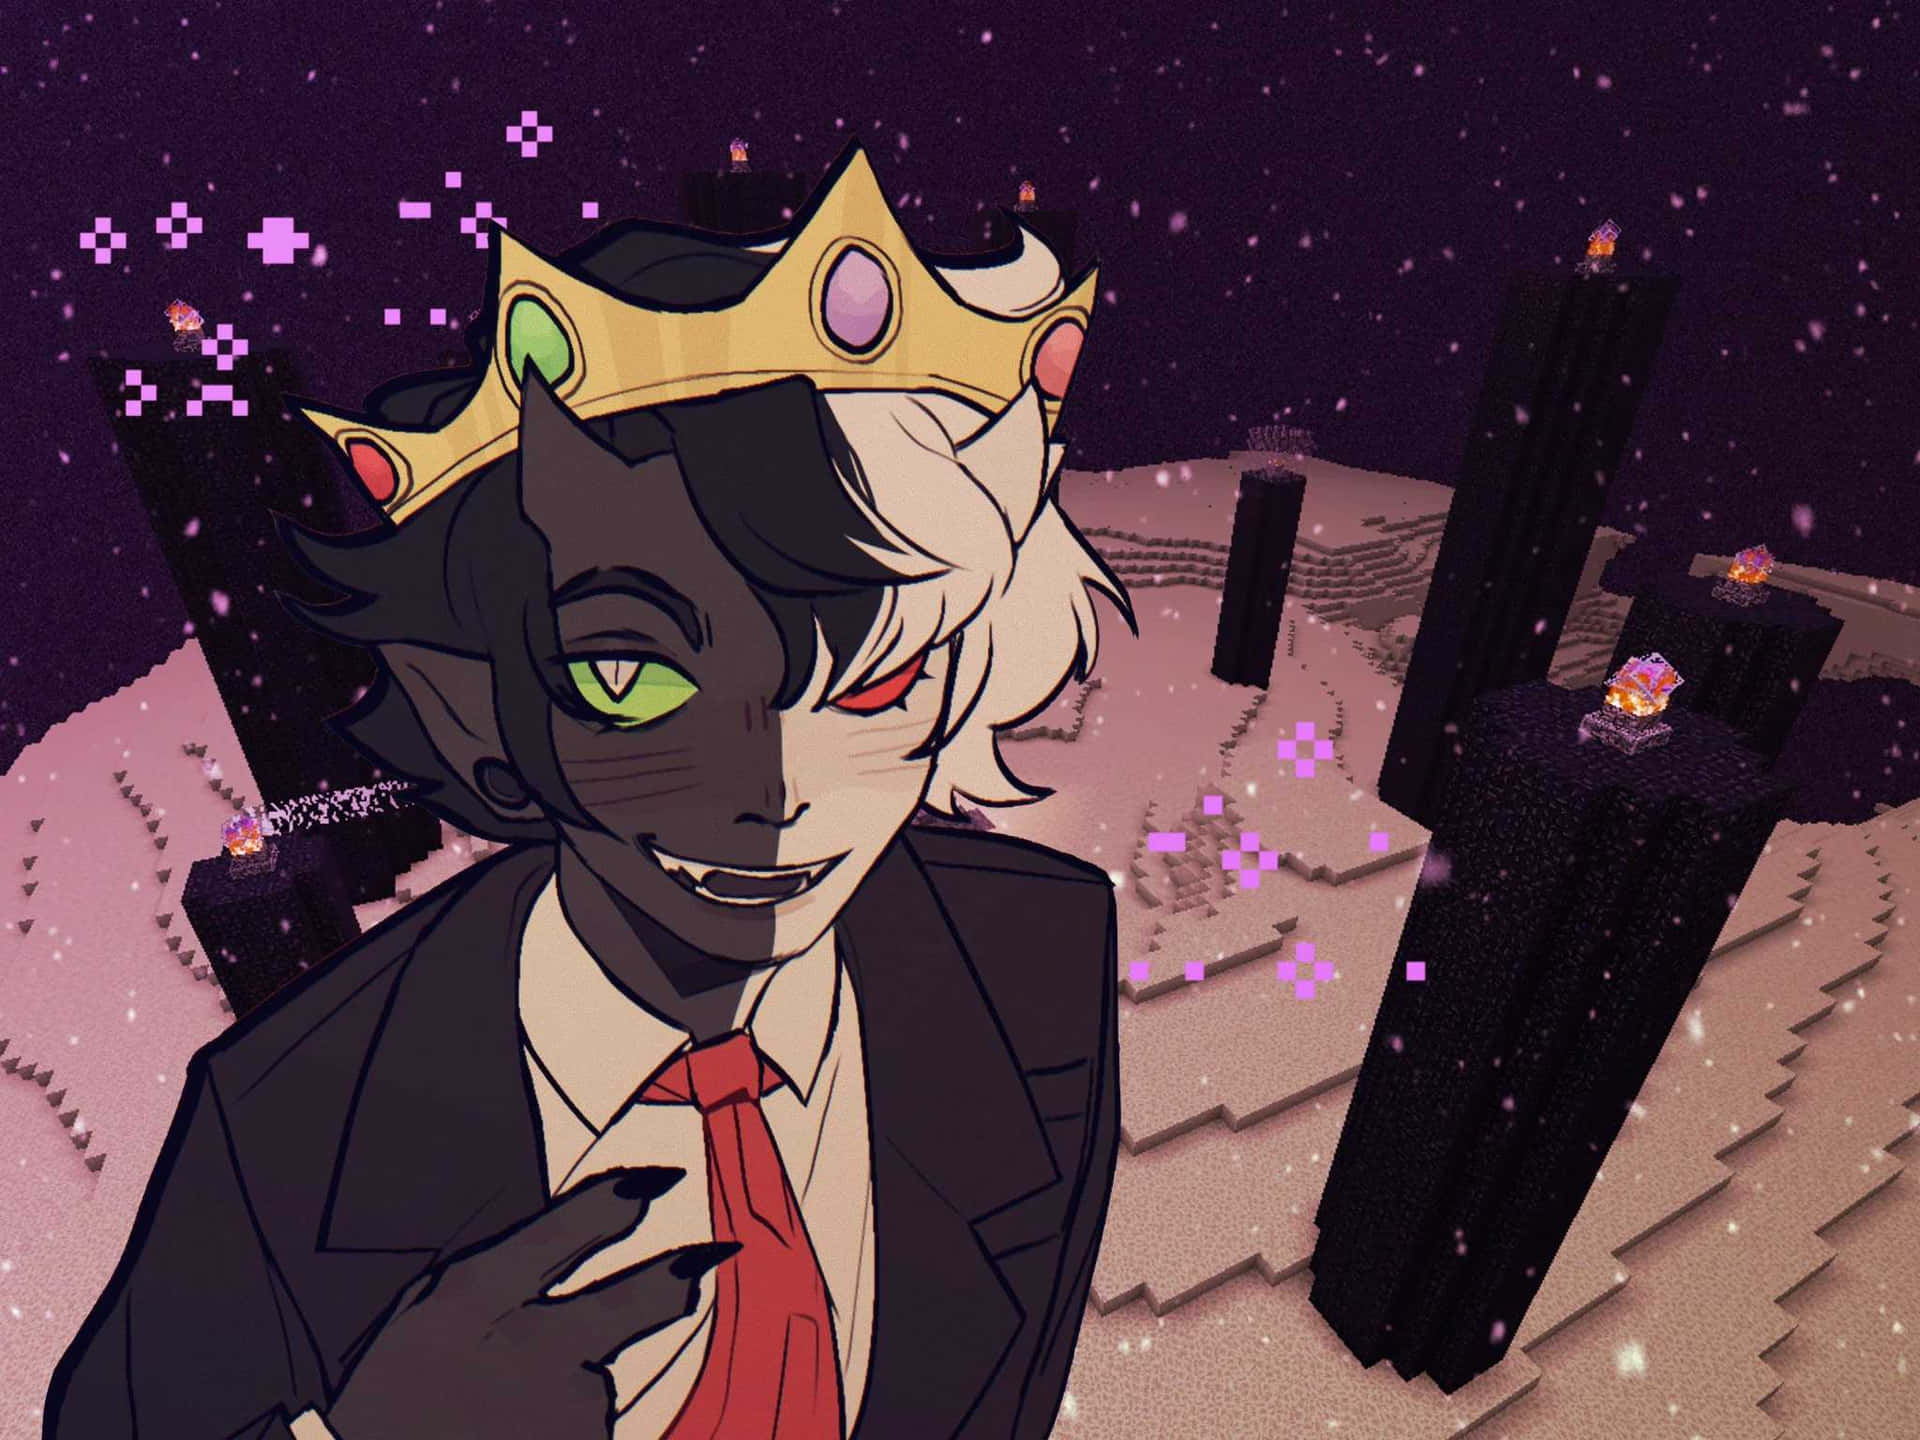 A Man In A Suit And Tie With A Crown